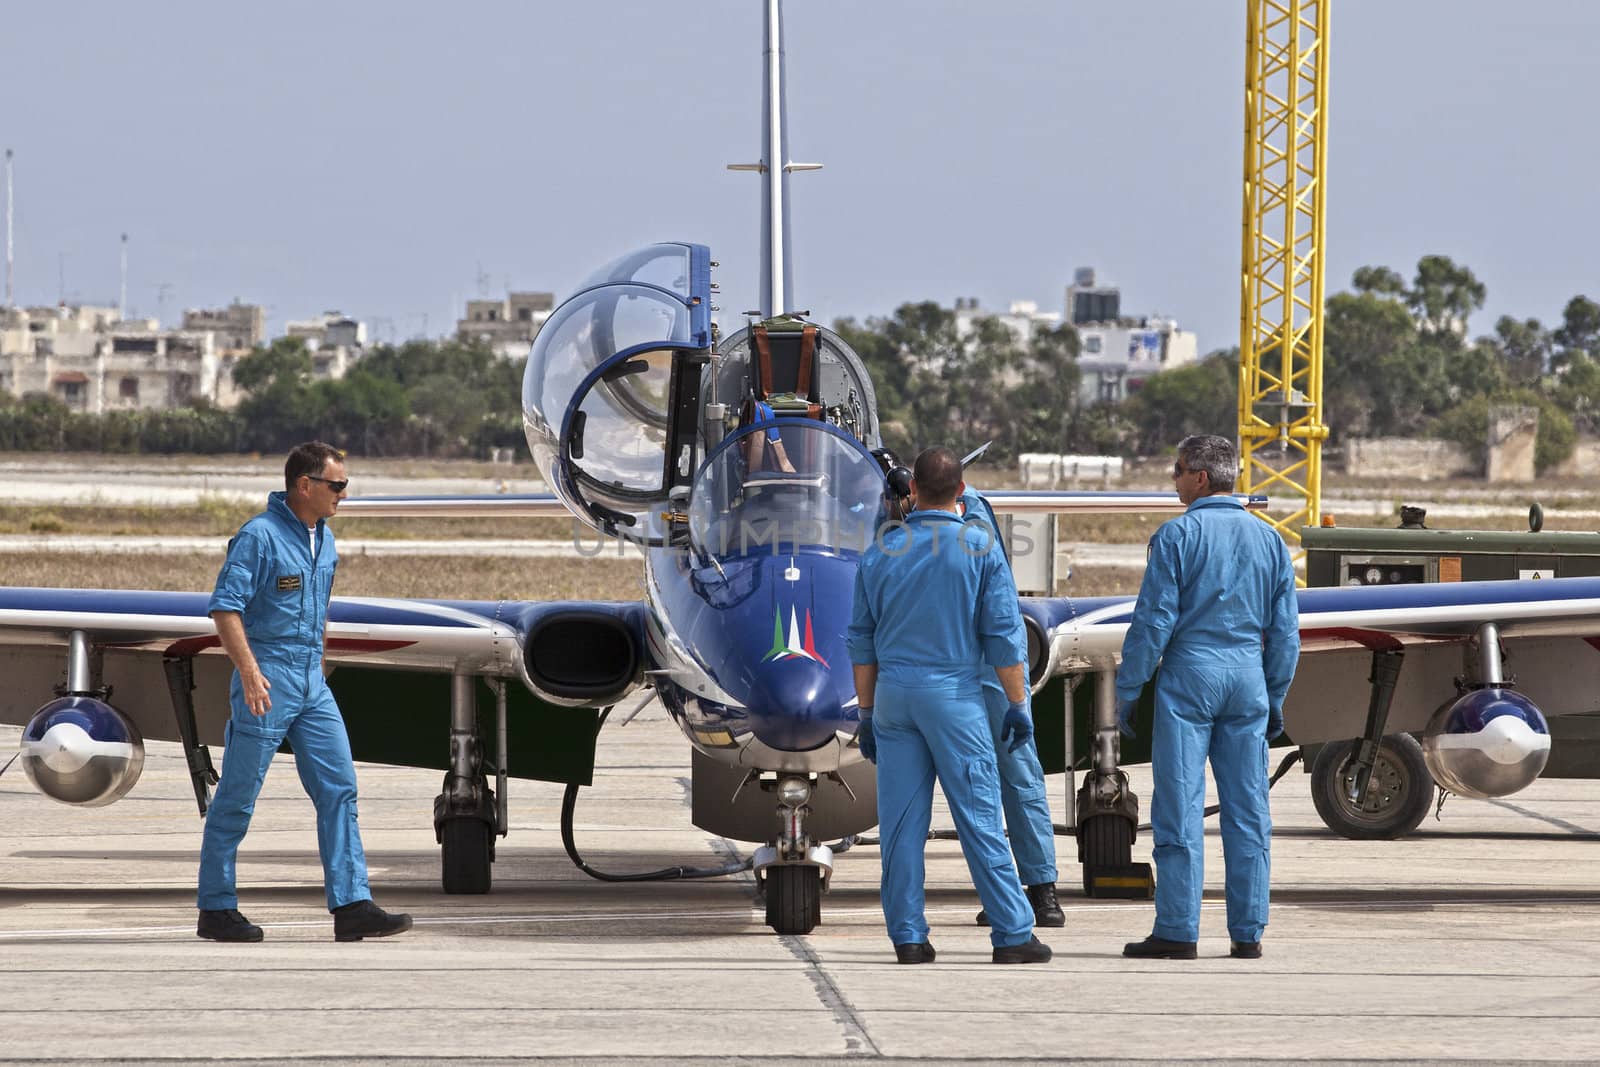 LUQA, MALTA - 25 SEP - Crew members from the Italian Frecce Tricolori aerobatic team check their aircraft before an aerial display during the Malta International Airshow on 25 September 2011